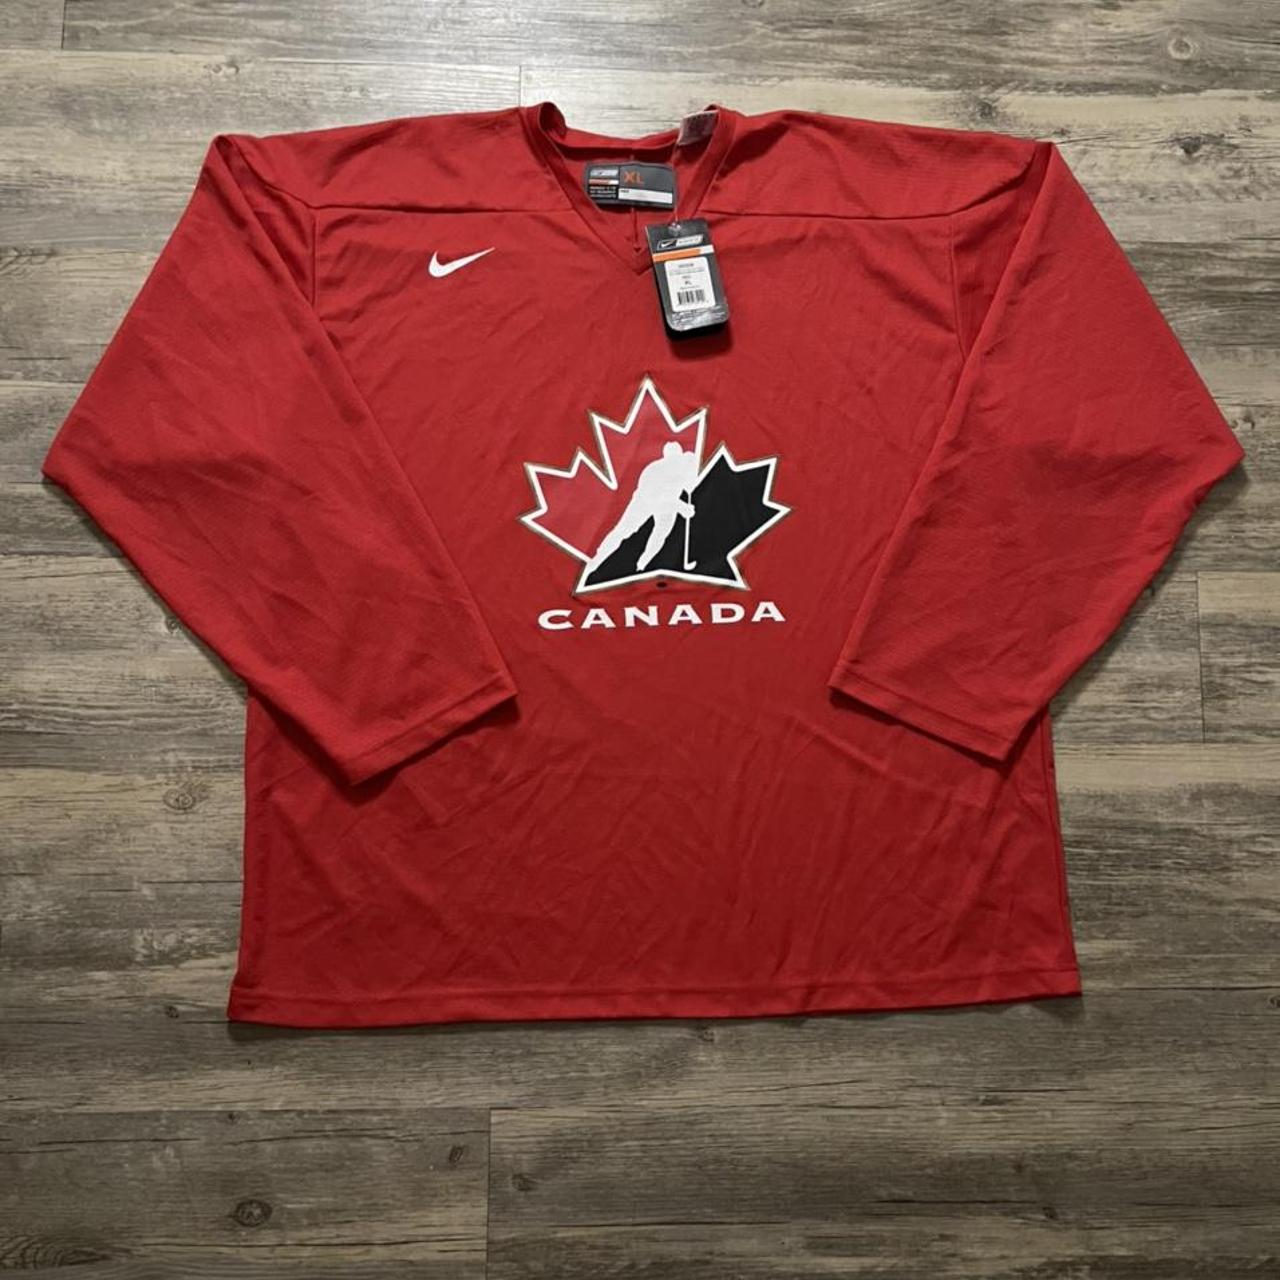 Nike/Bauer Team Canada Red Hockey Jersey - Size Medium - New With Out Tag